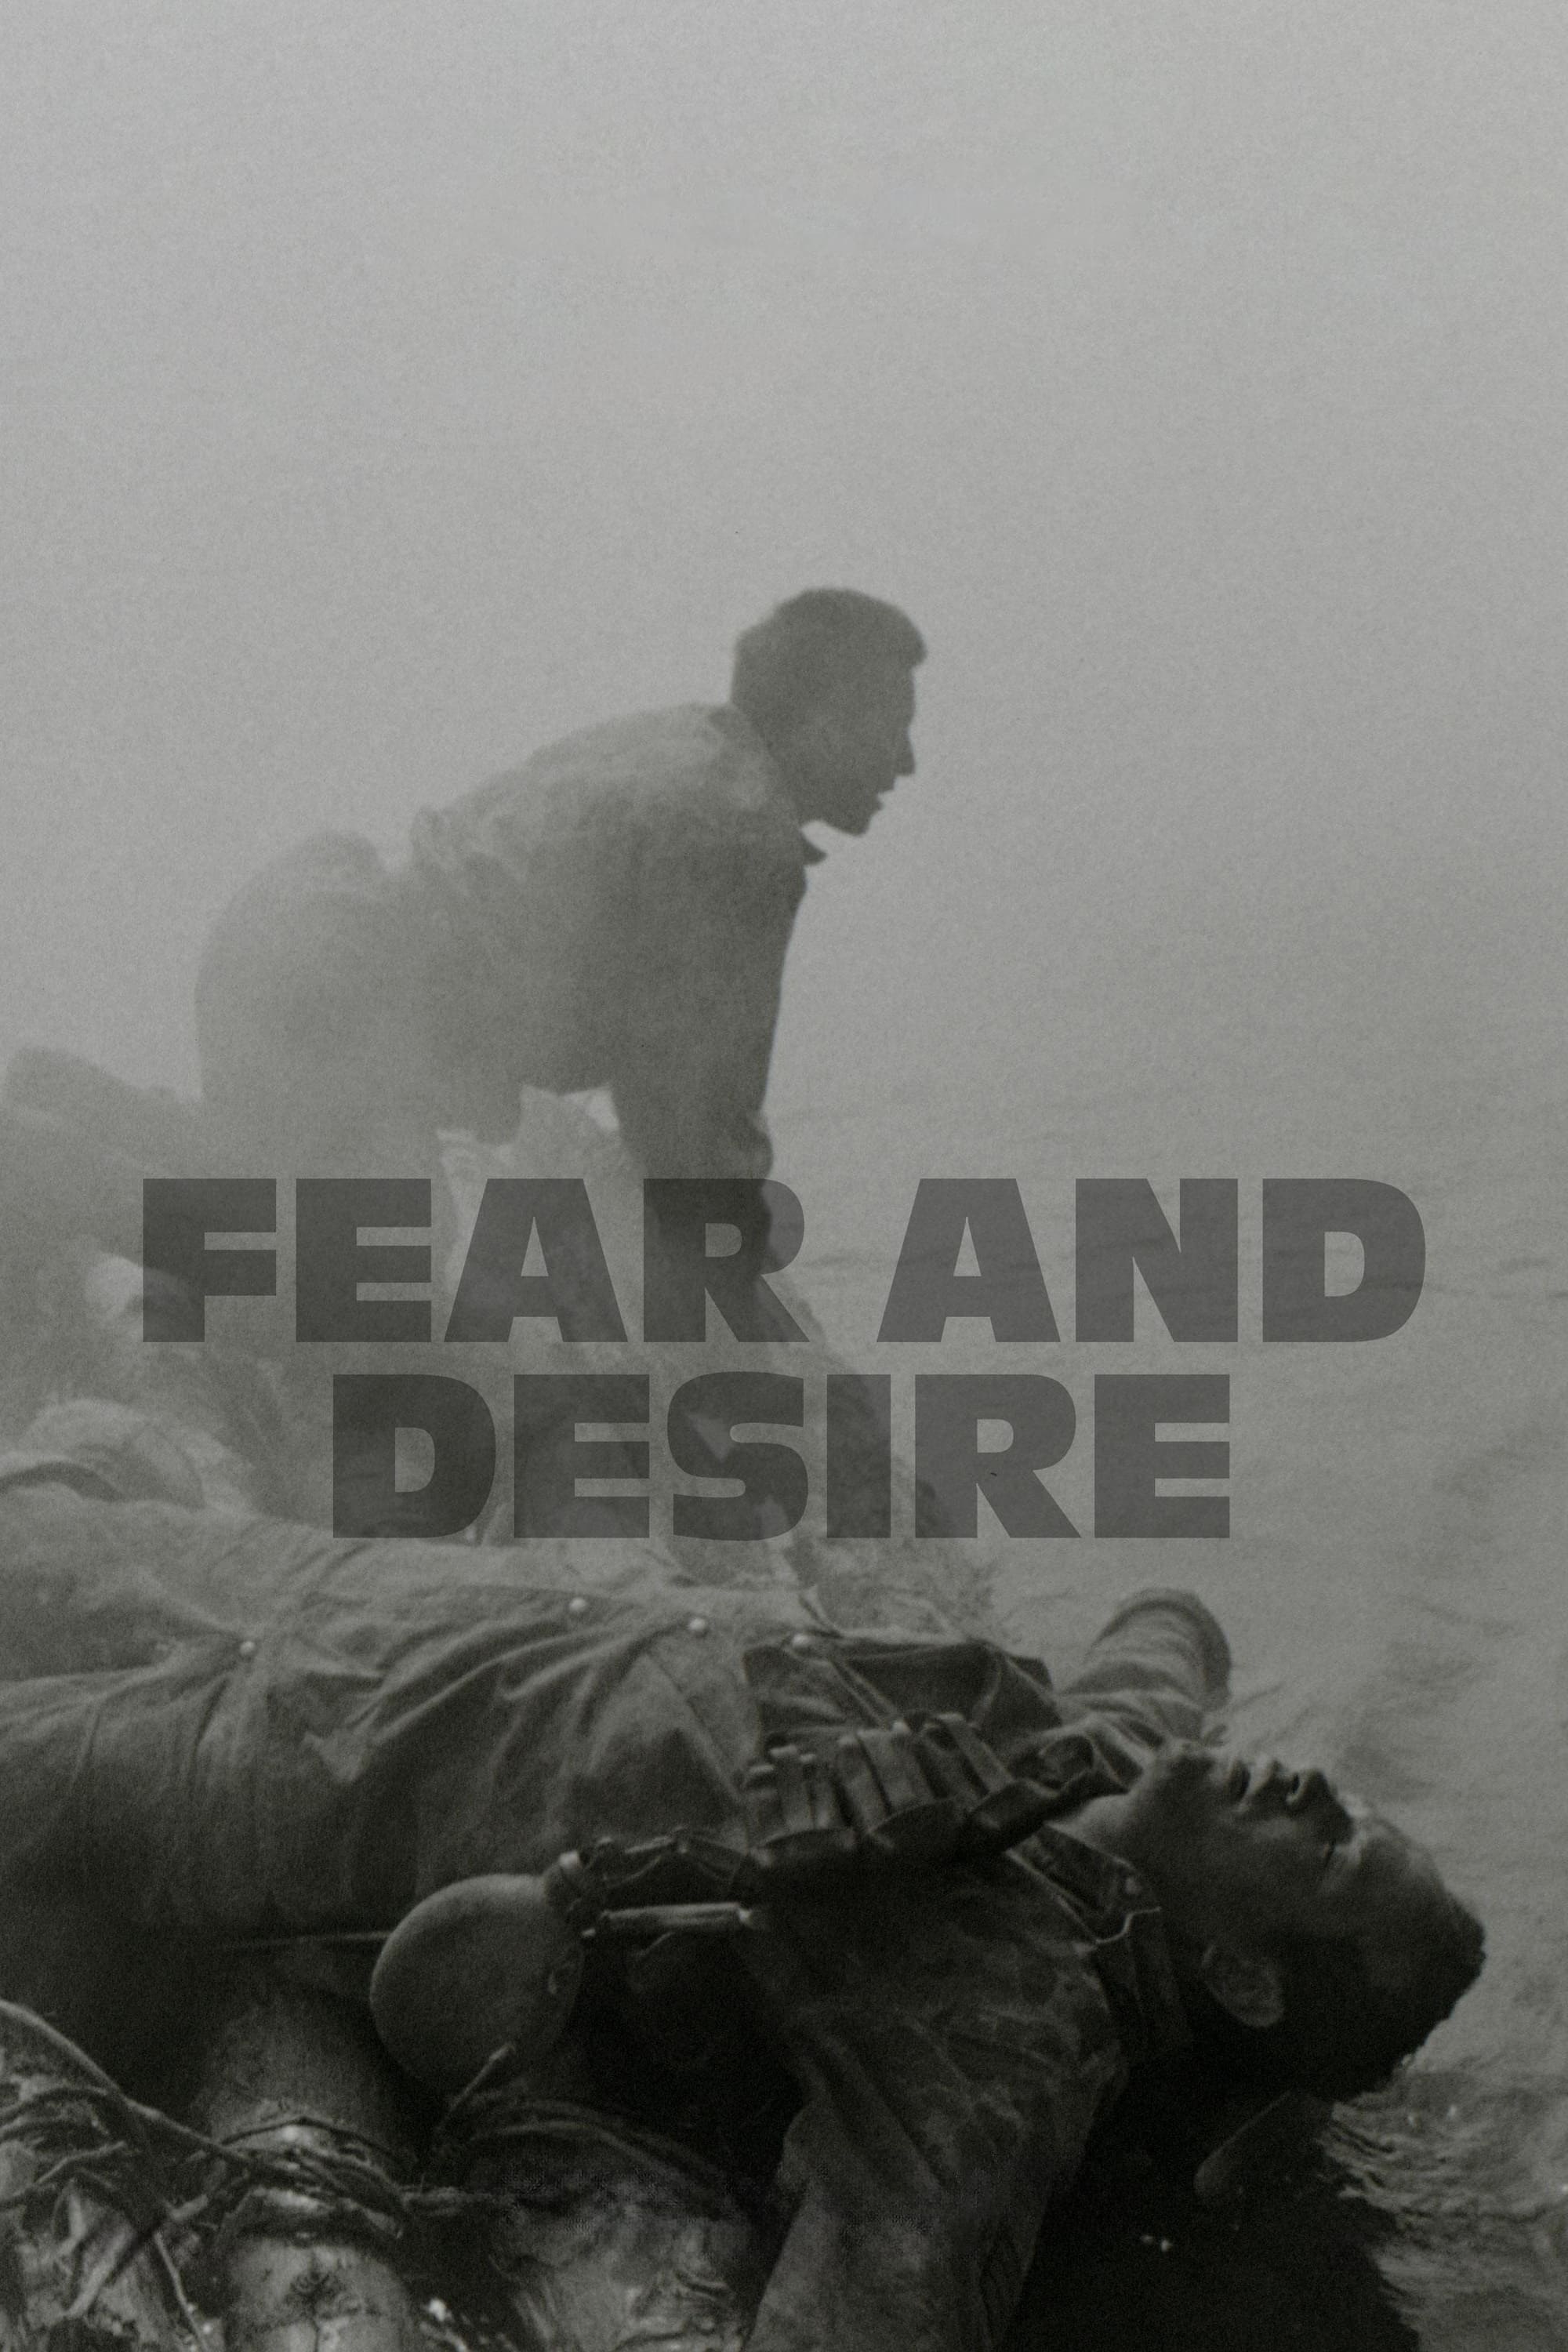 Fear and Desire